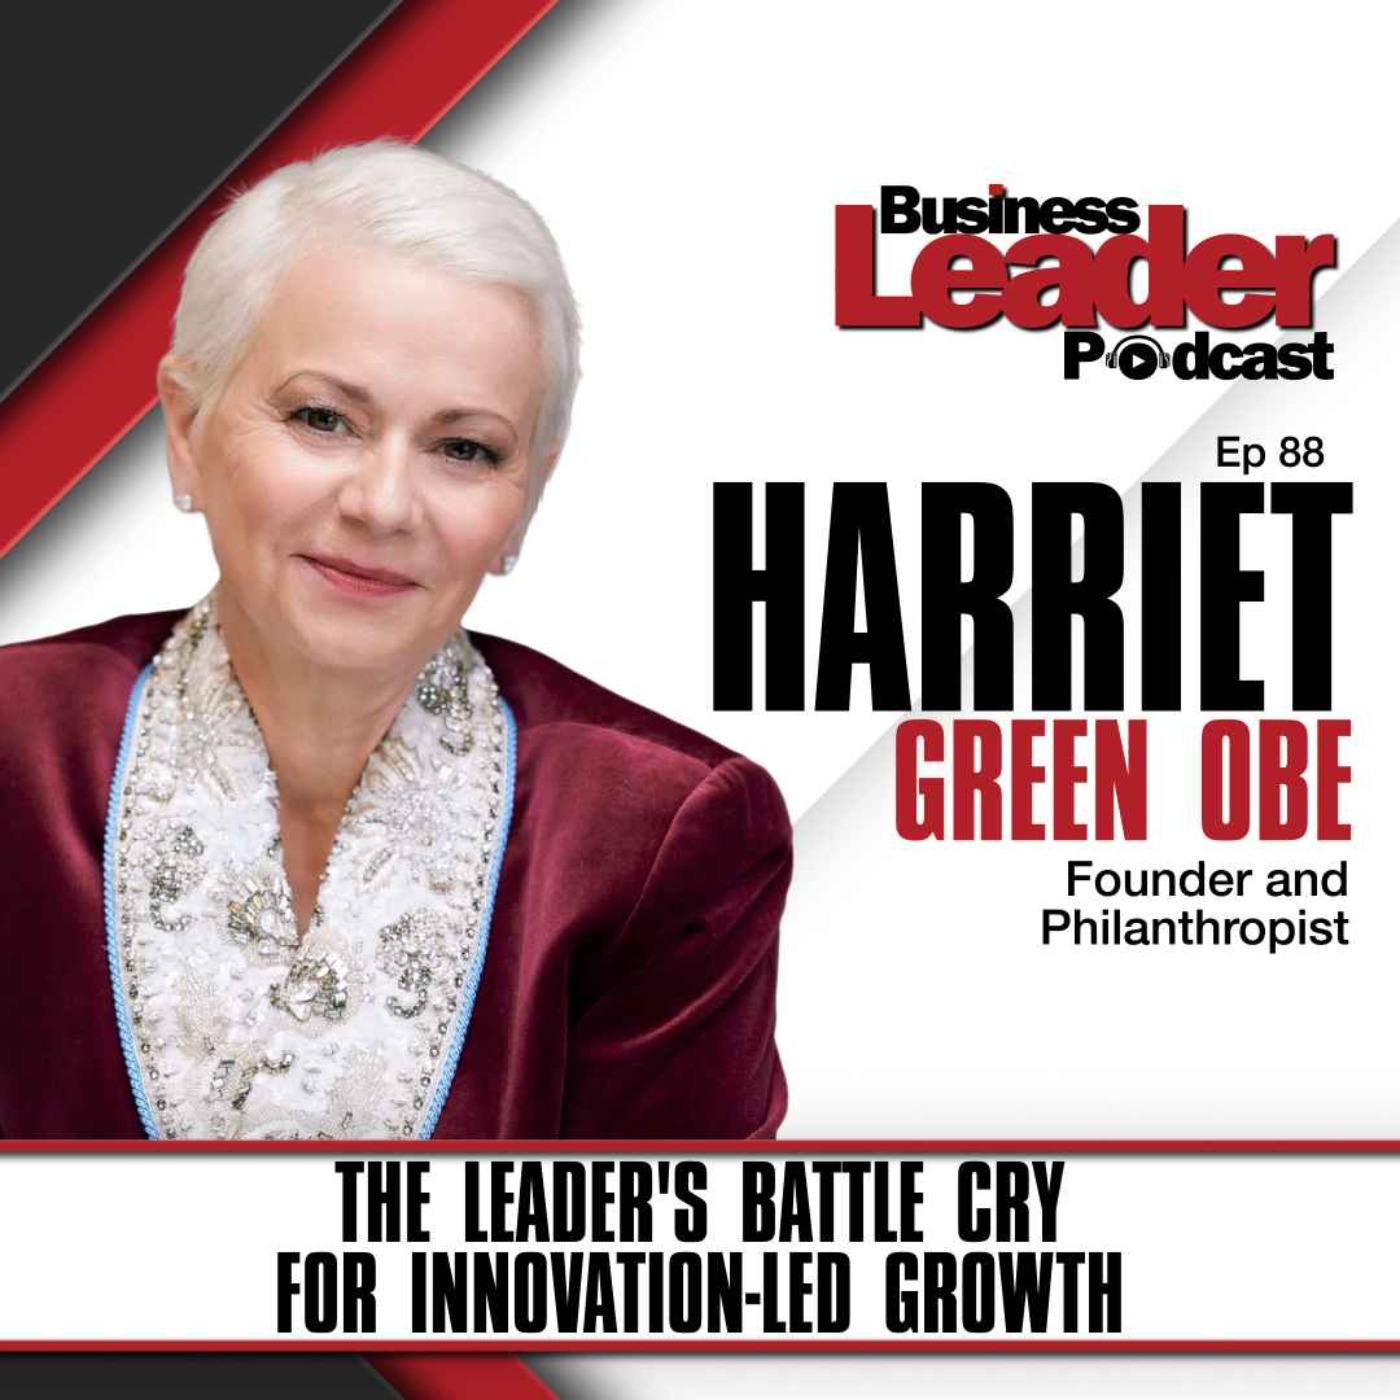 Harriet Green OBE: The leader’s battle cry for innovation-led growth